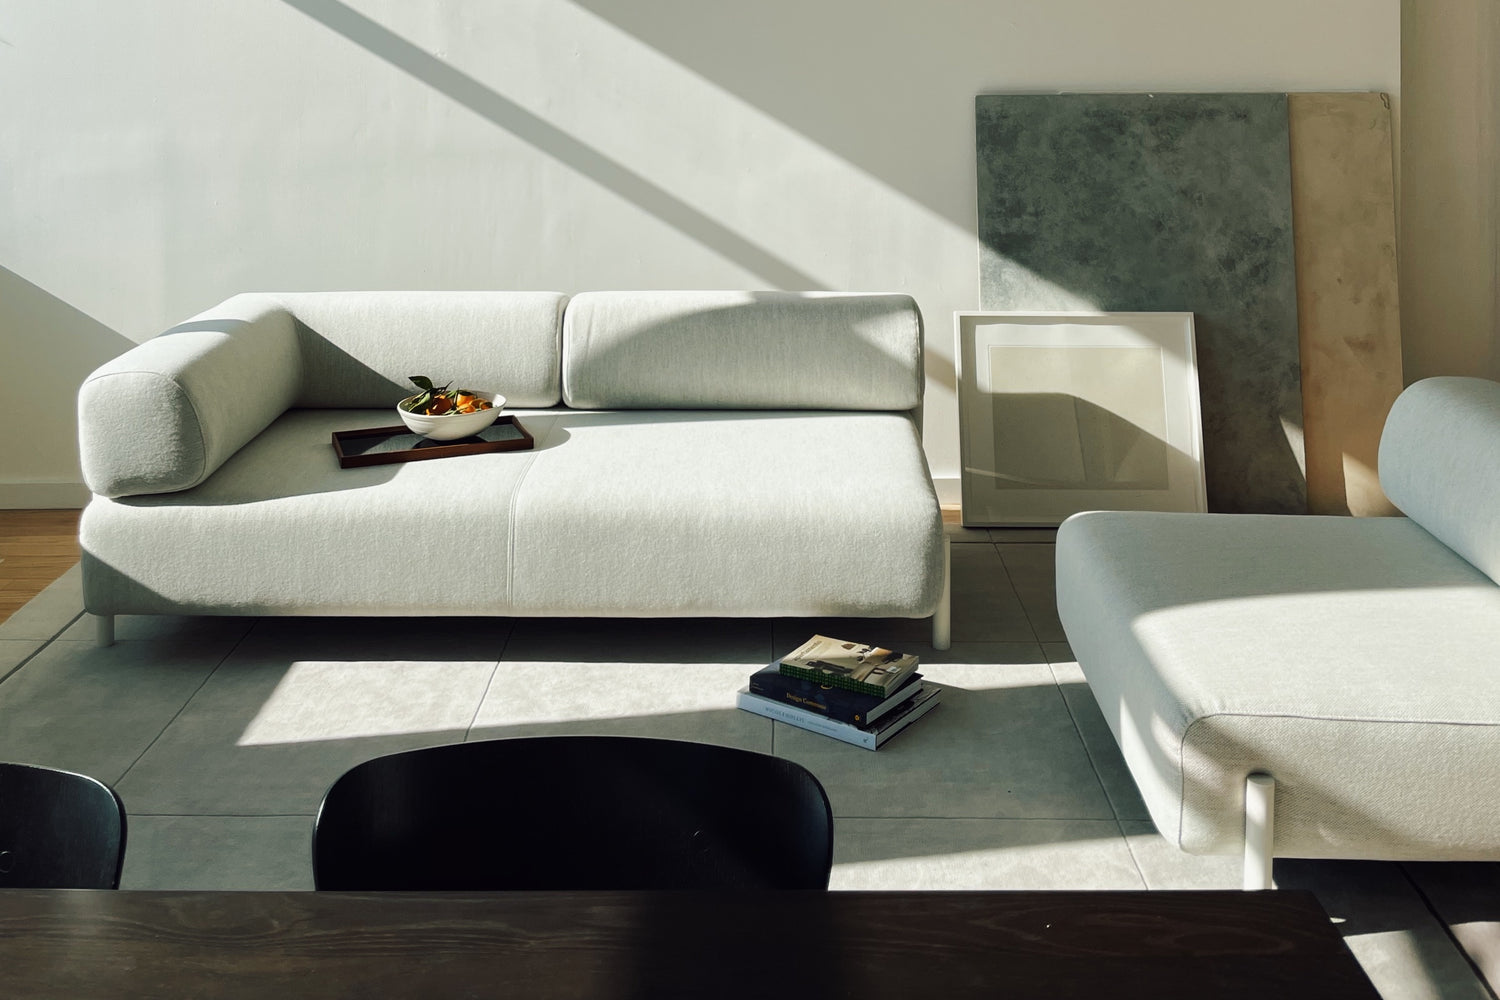 Hem - UGC of a living room scene featuring Palo Modular Sofa Chaise and Palo Modular Single Seater in Chalk.